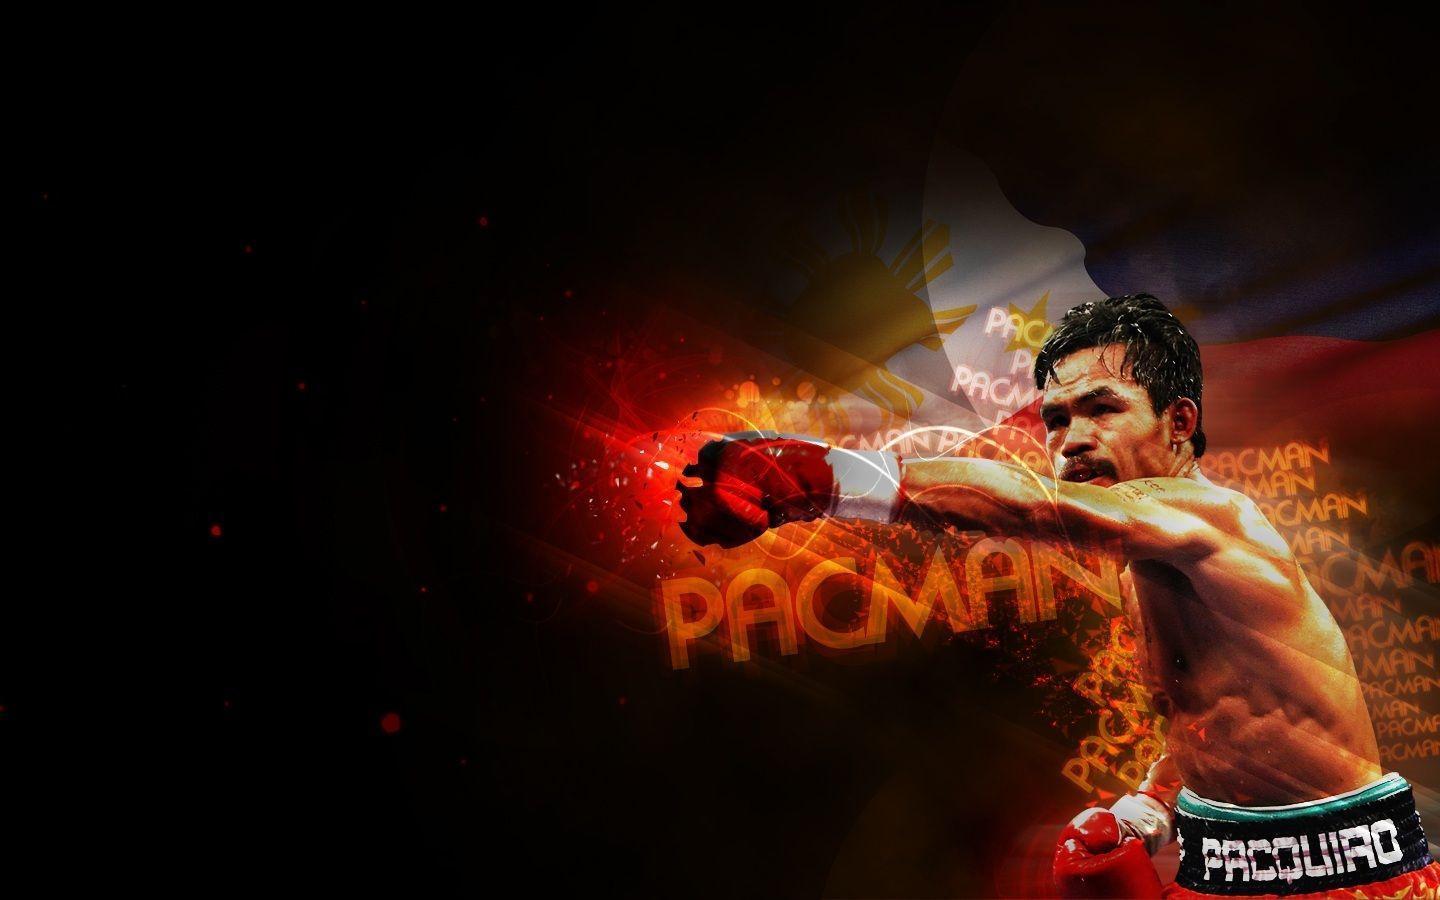 Manny Pacquiao Wallpapers - Wallpaper Cave